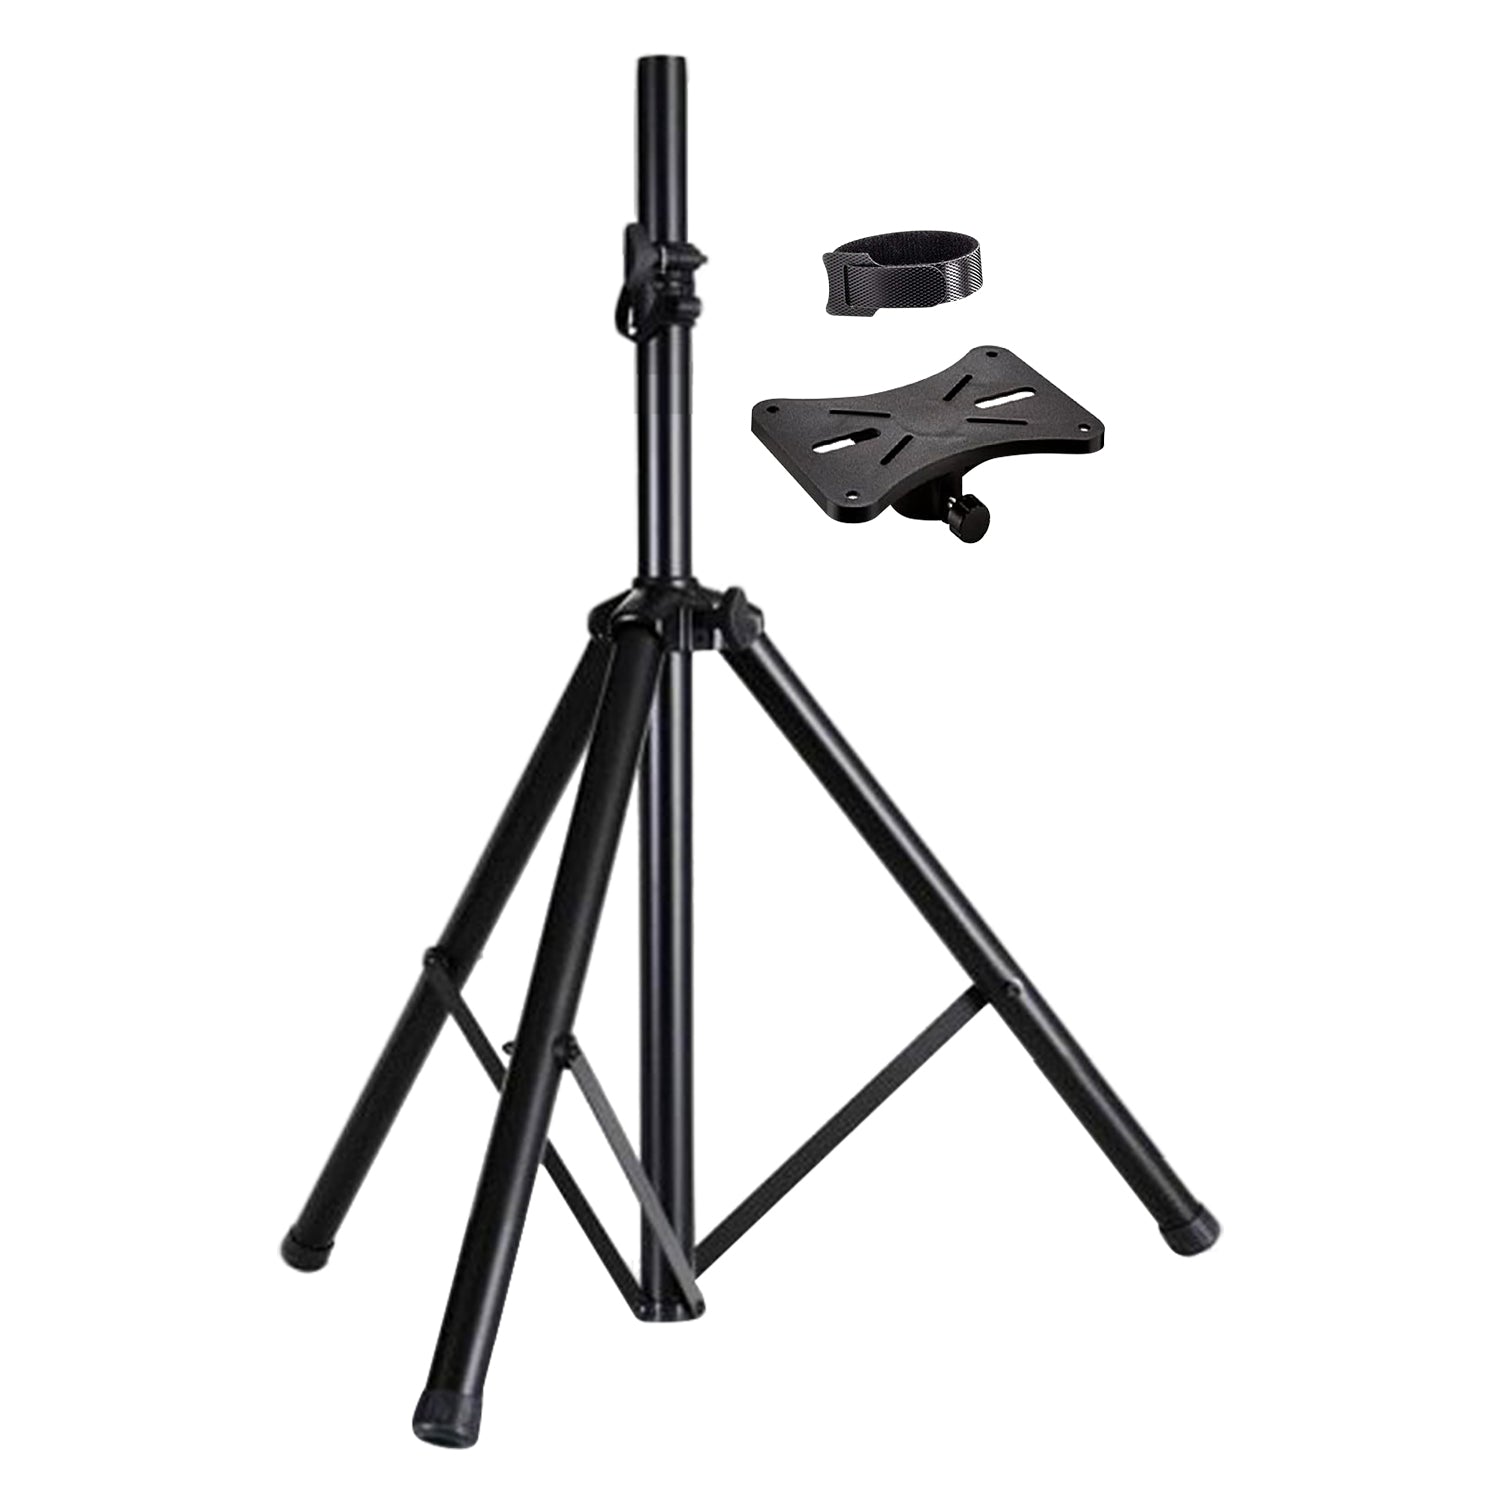 5 Core PA Speaker Stand Universal for Large Speakers Black 4FT Tripod Speaker Stand Height Adjustable from 68 to 128 CM onstage heavy duty Supports 132 lbs- SS HD 1PK 4FT